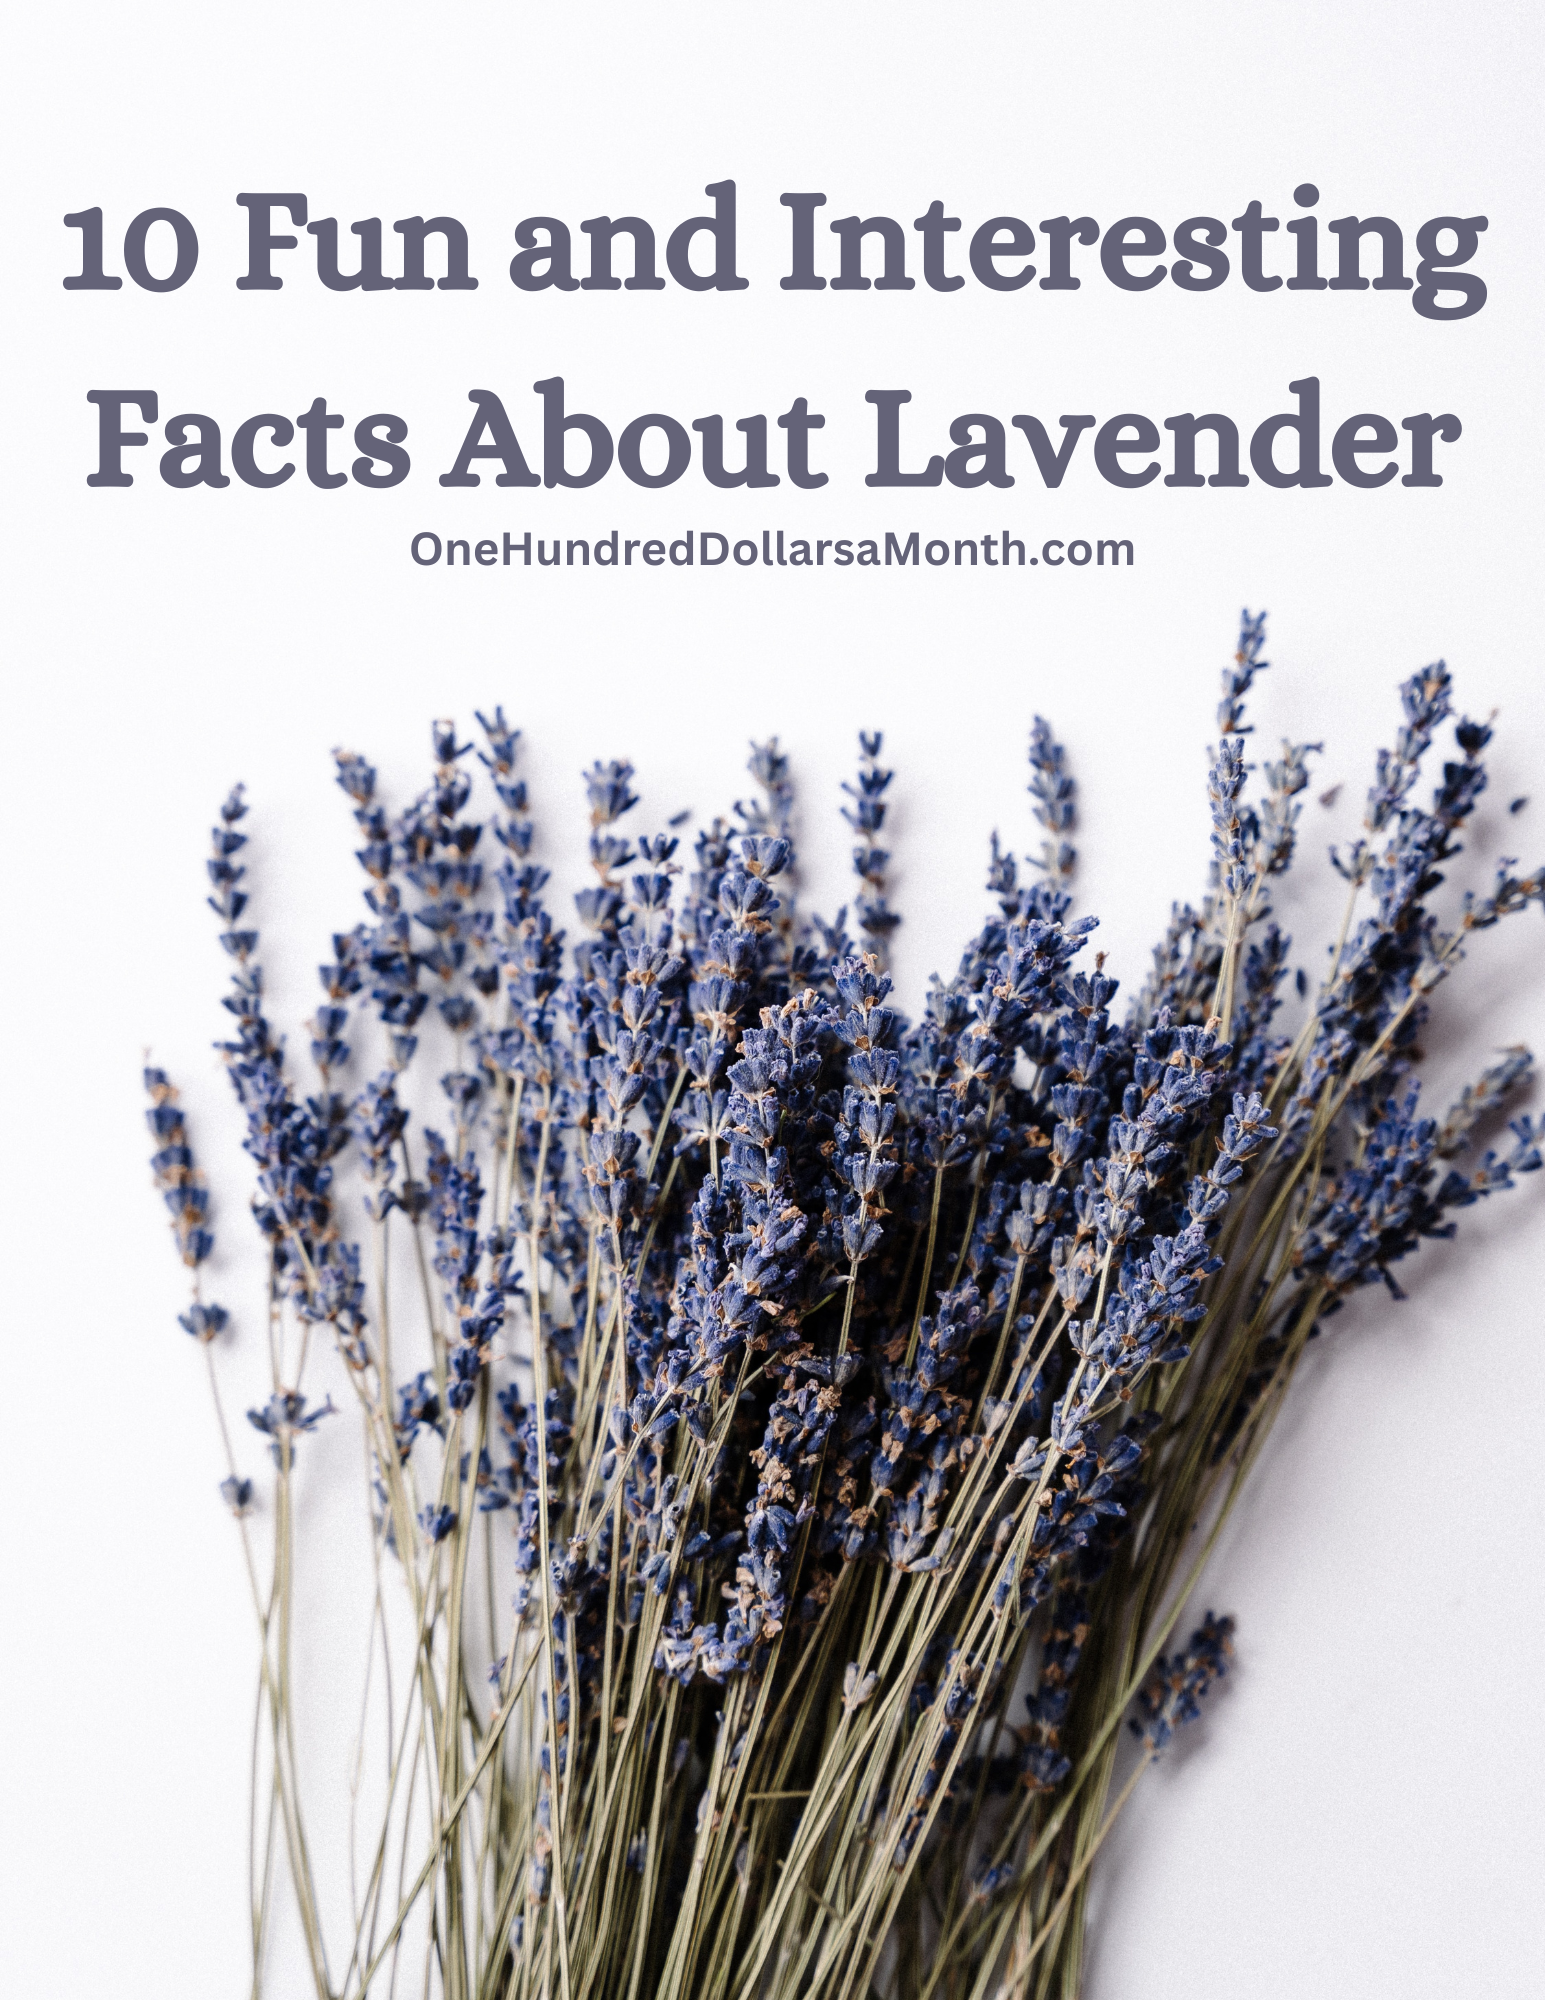 10 Fun and Interesting Facts About Lavender